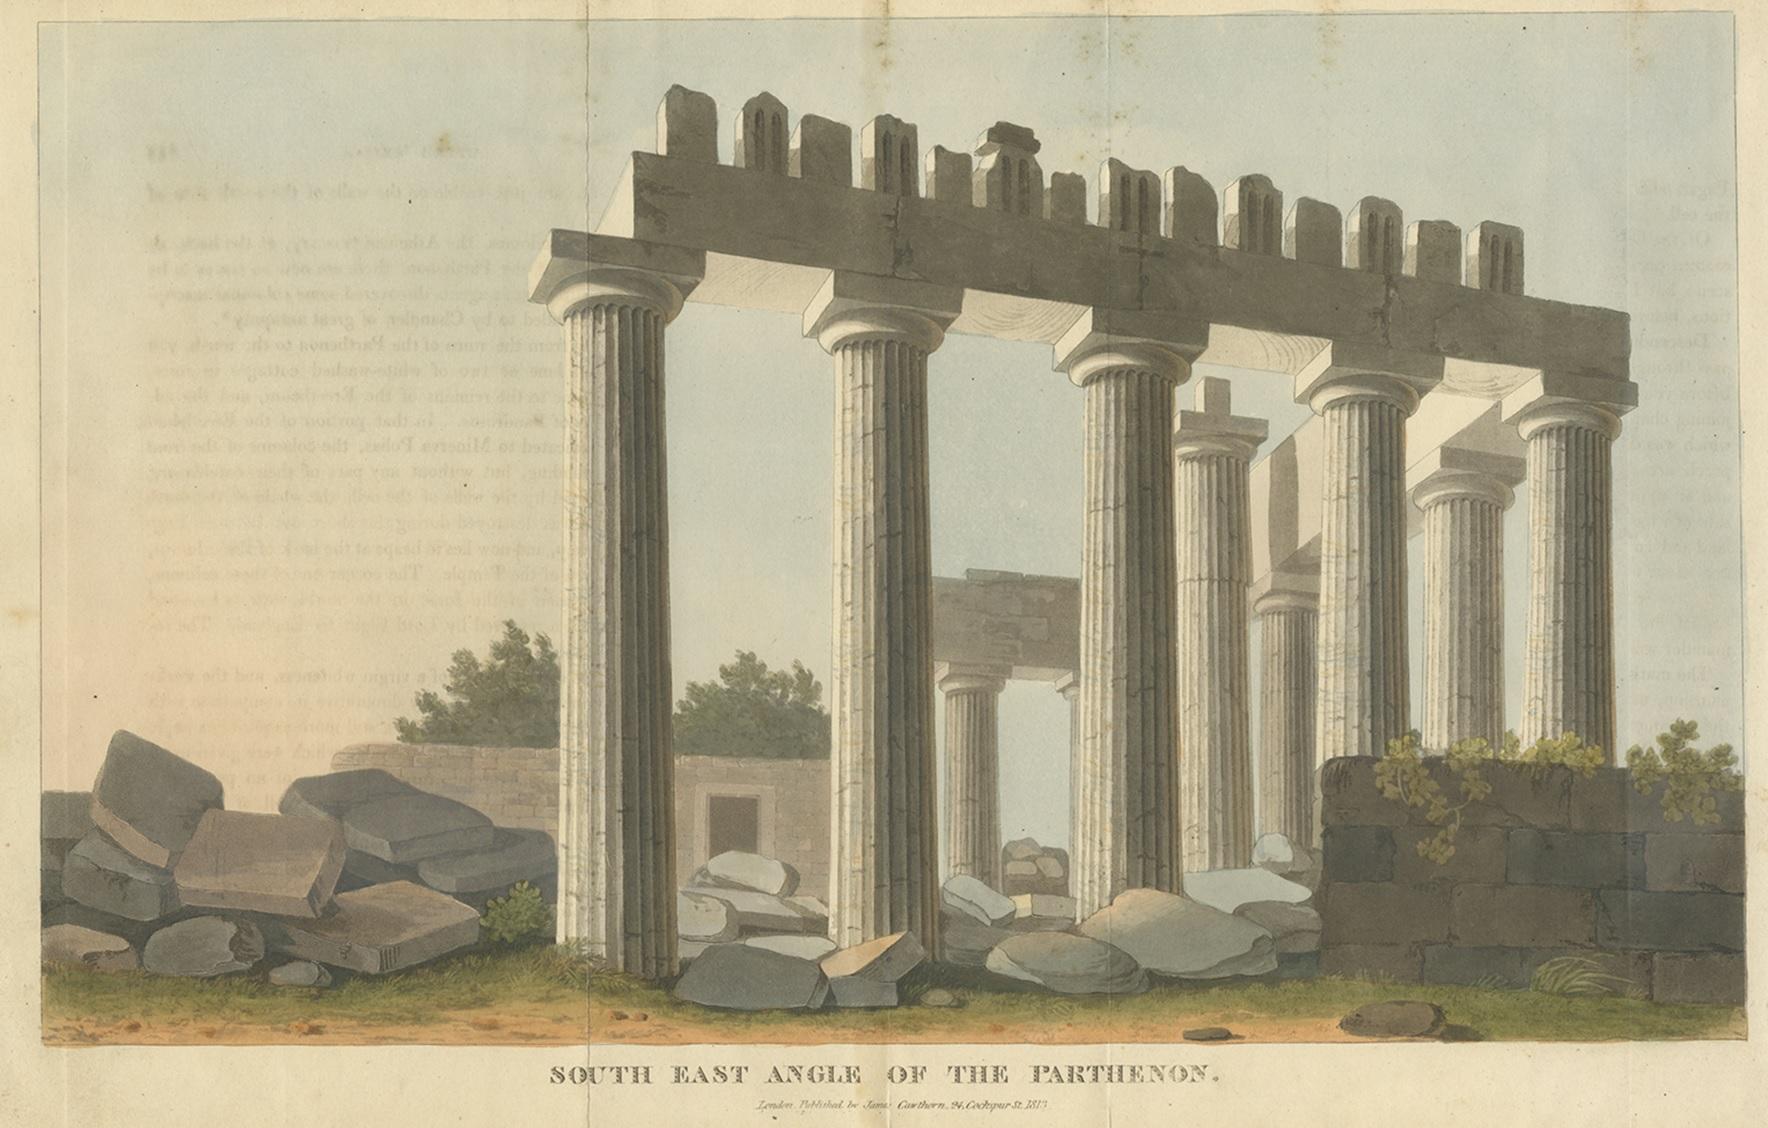 Antique print titled 'South East Angle of the Parthenon'. View of the Parthenon, a former temple on the Athenian Acropolis, Greece. This print originates from 'A Journey Through Albania, and Other Provinces of Turkey in Europe' by John Cam Hobhouse.